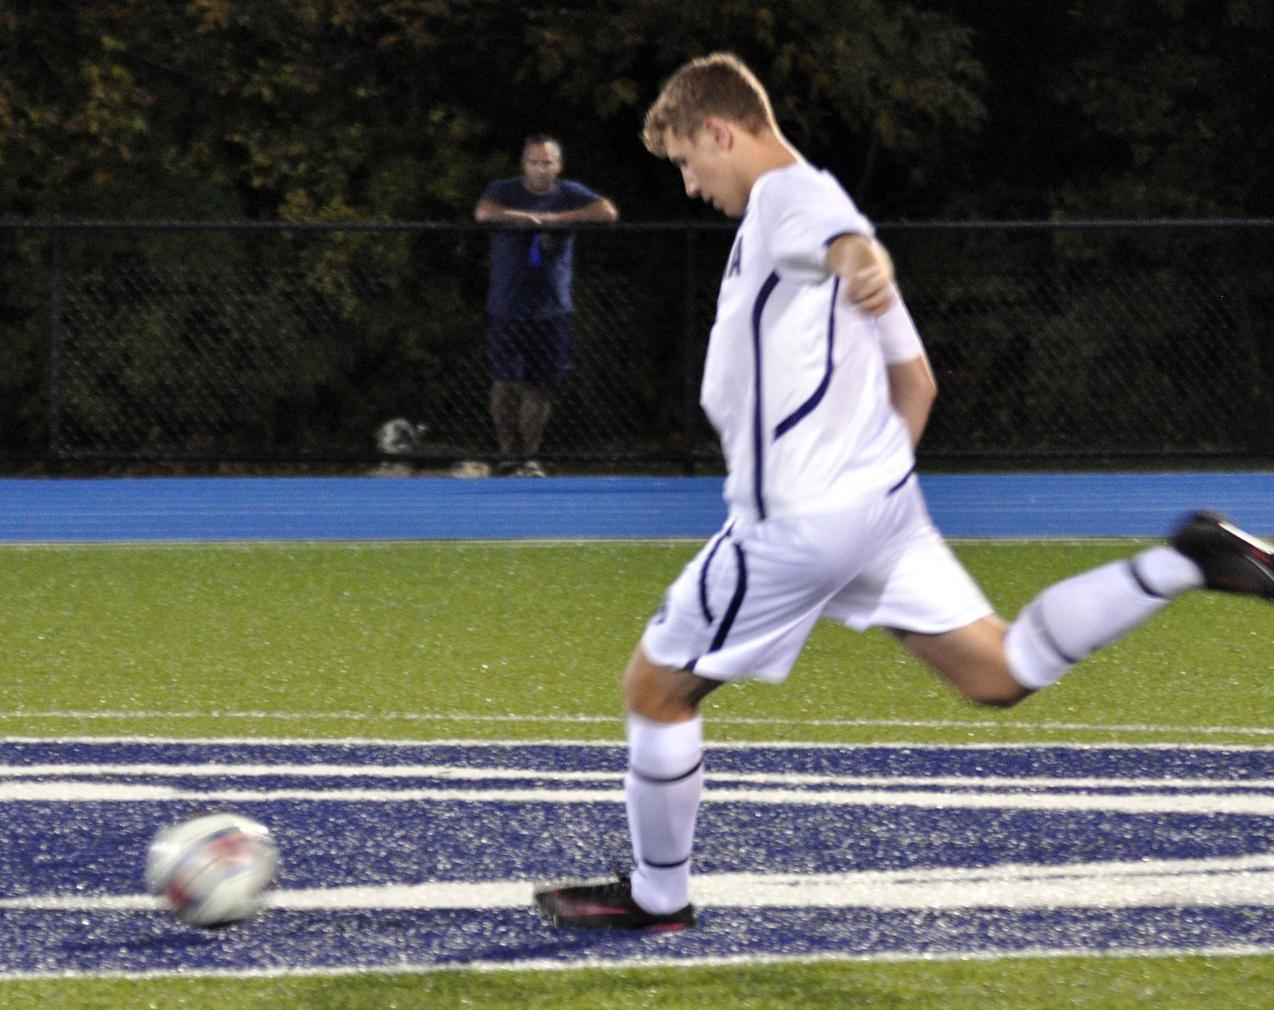 Photo: Penn State Altoona freshman defender Jimmy Natale scored his first collegiate goal in Thursday night's loss at Juniata College.